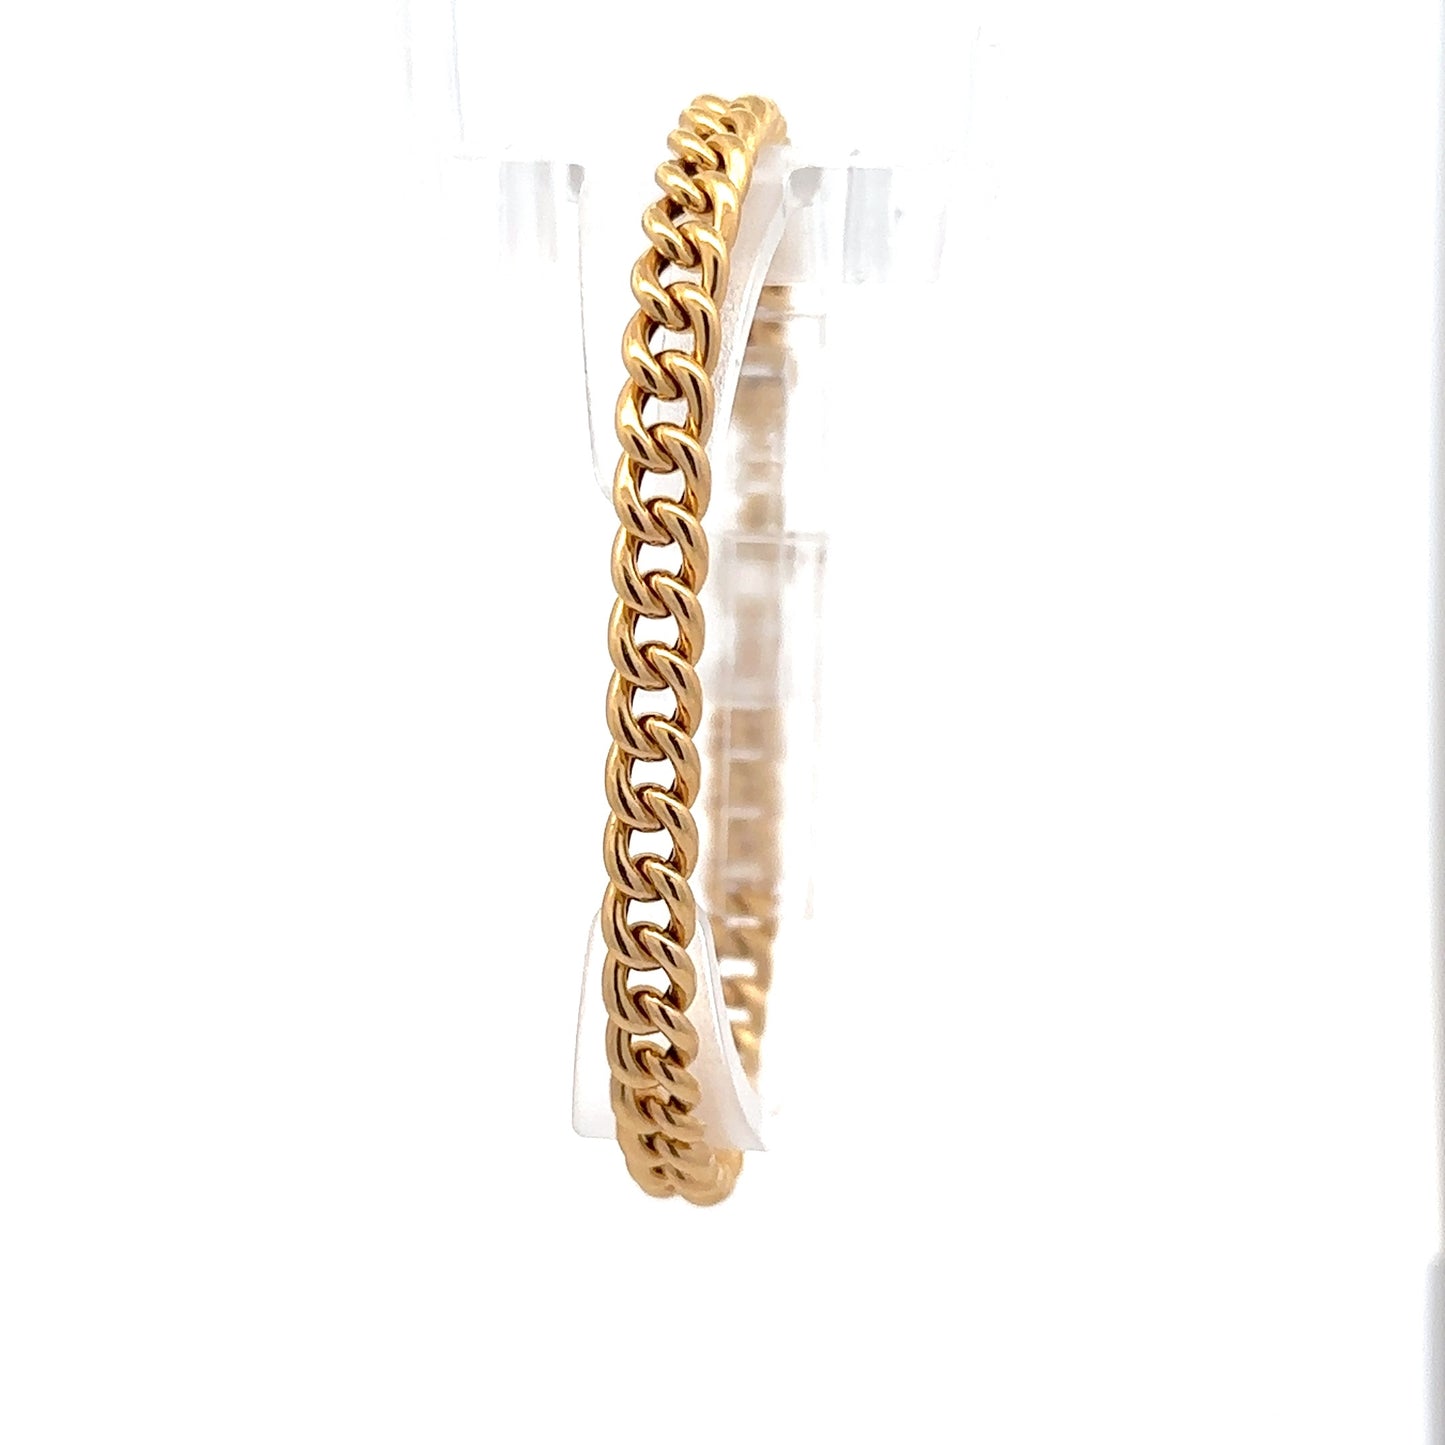 Pictured: The front of the 14K yellow gold link bracelet.